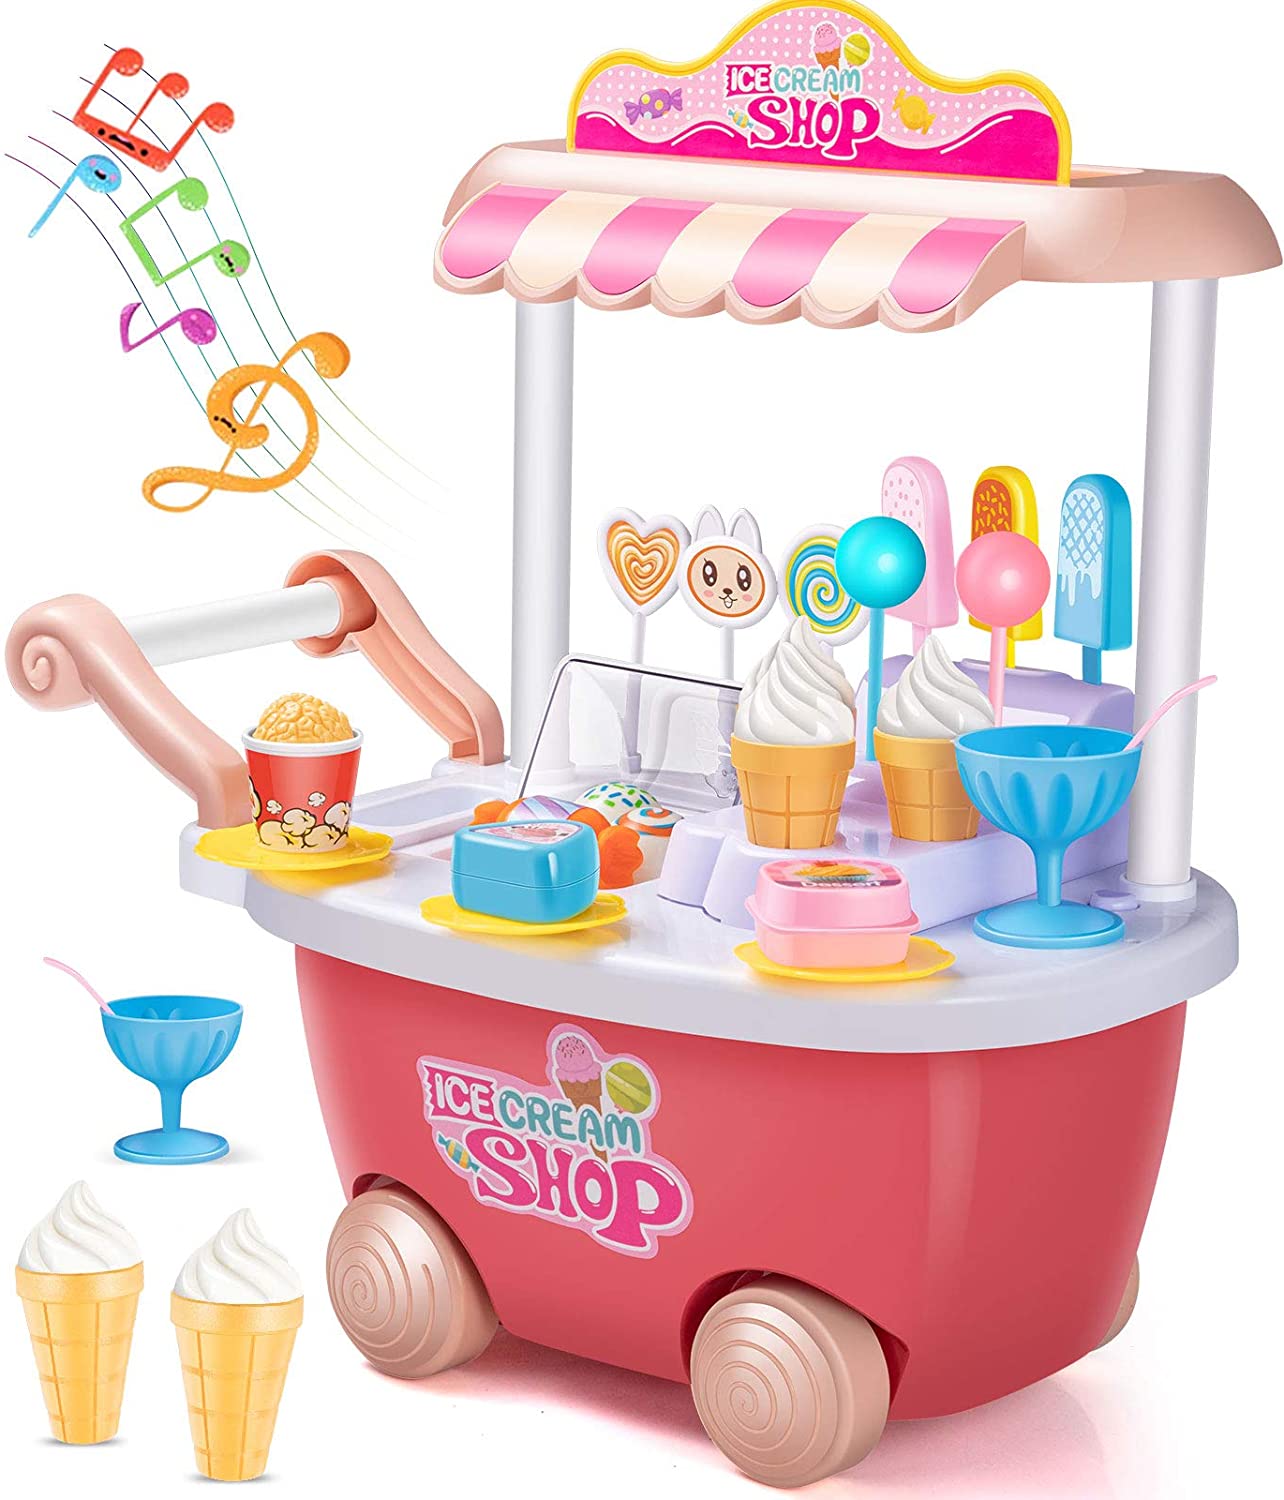 Kids Role Pretend Play Toys Set Gift Music Lighting Ice Cream Cart Toy 